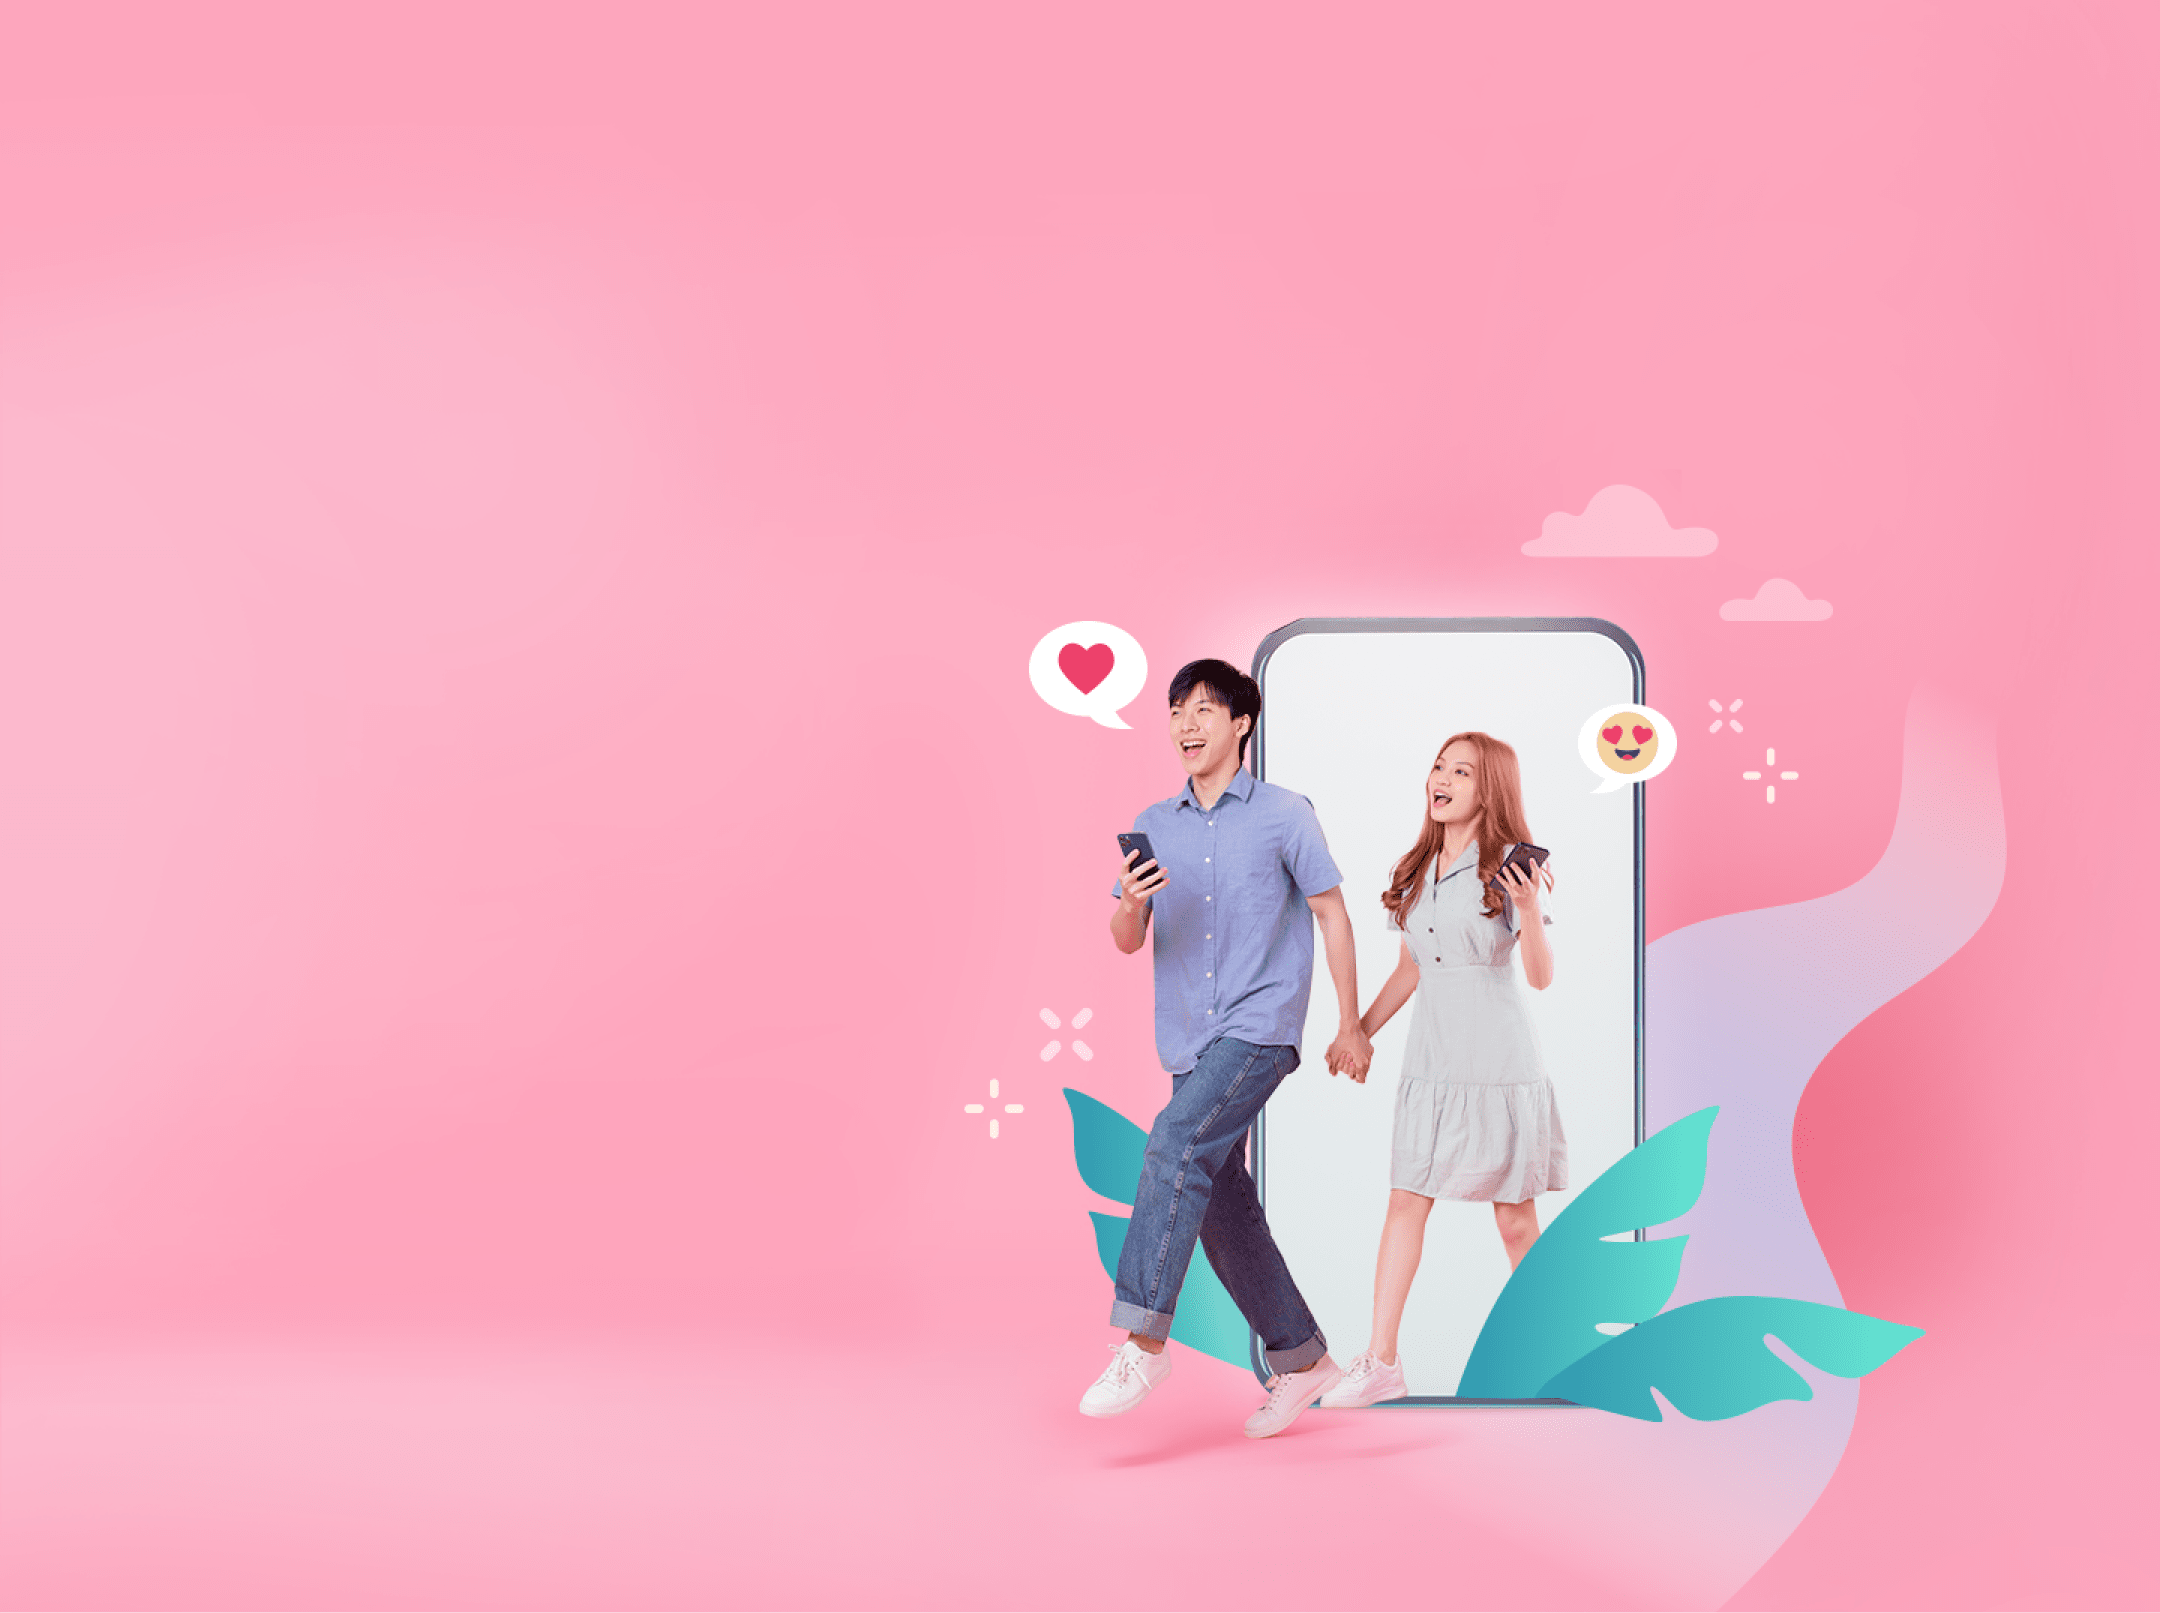 app launch concept wide view couple holding hands walking out of a phone